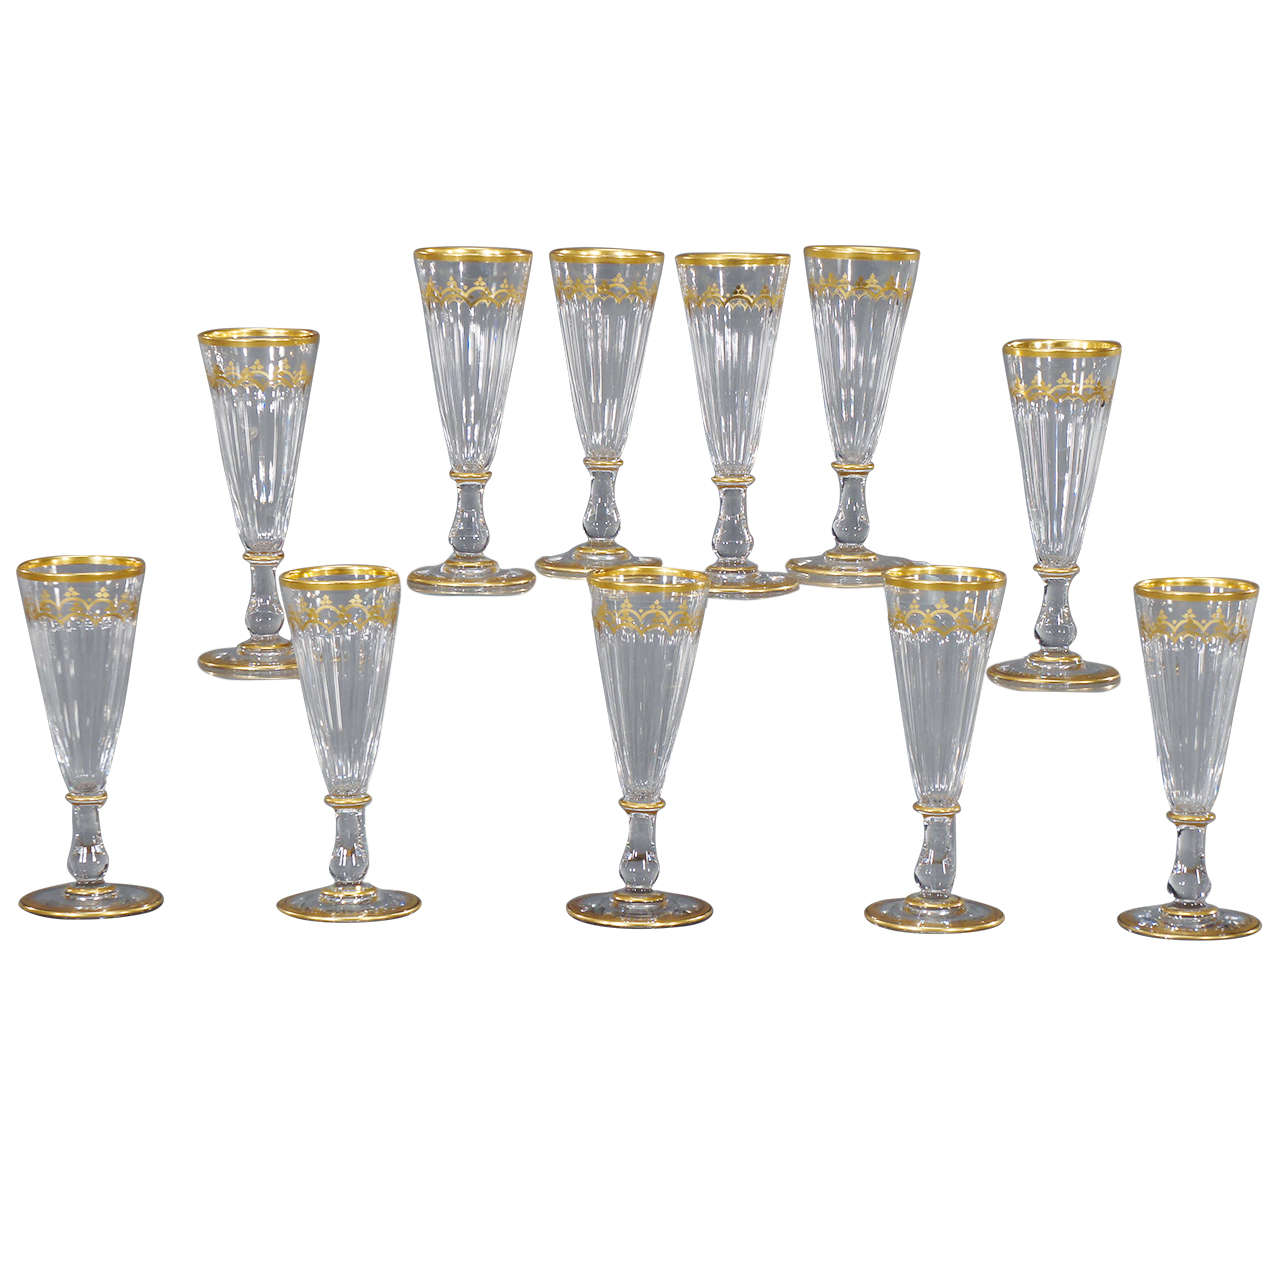 Set of 11 19th Century Baccarat Champagne Flutes or Goblets with Gold Tri